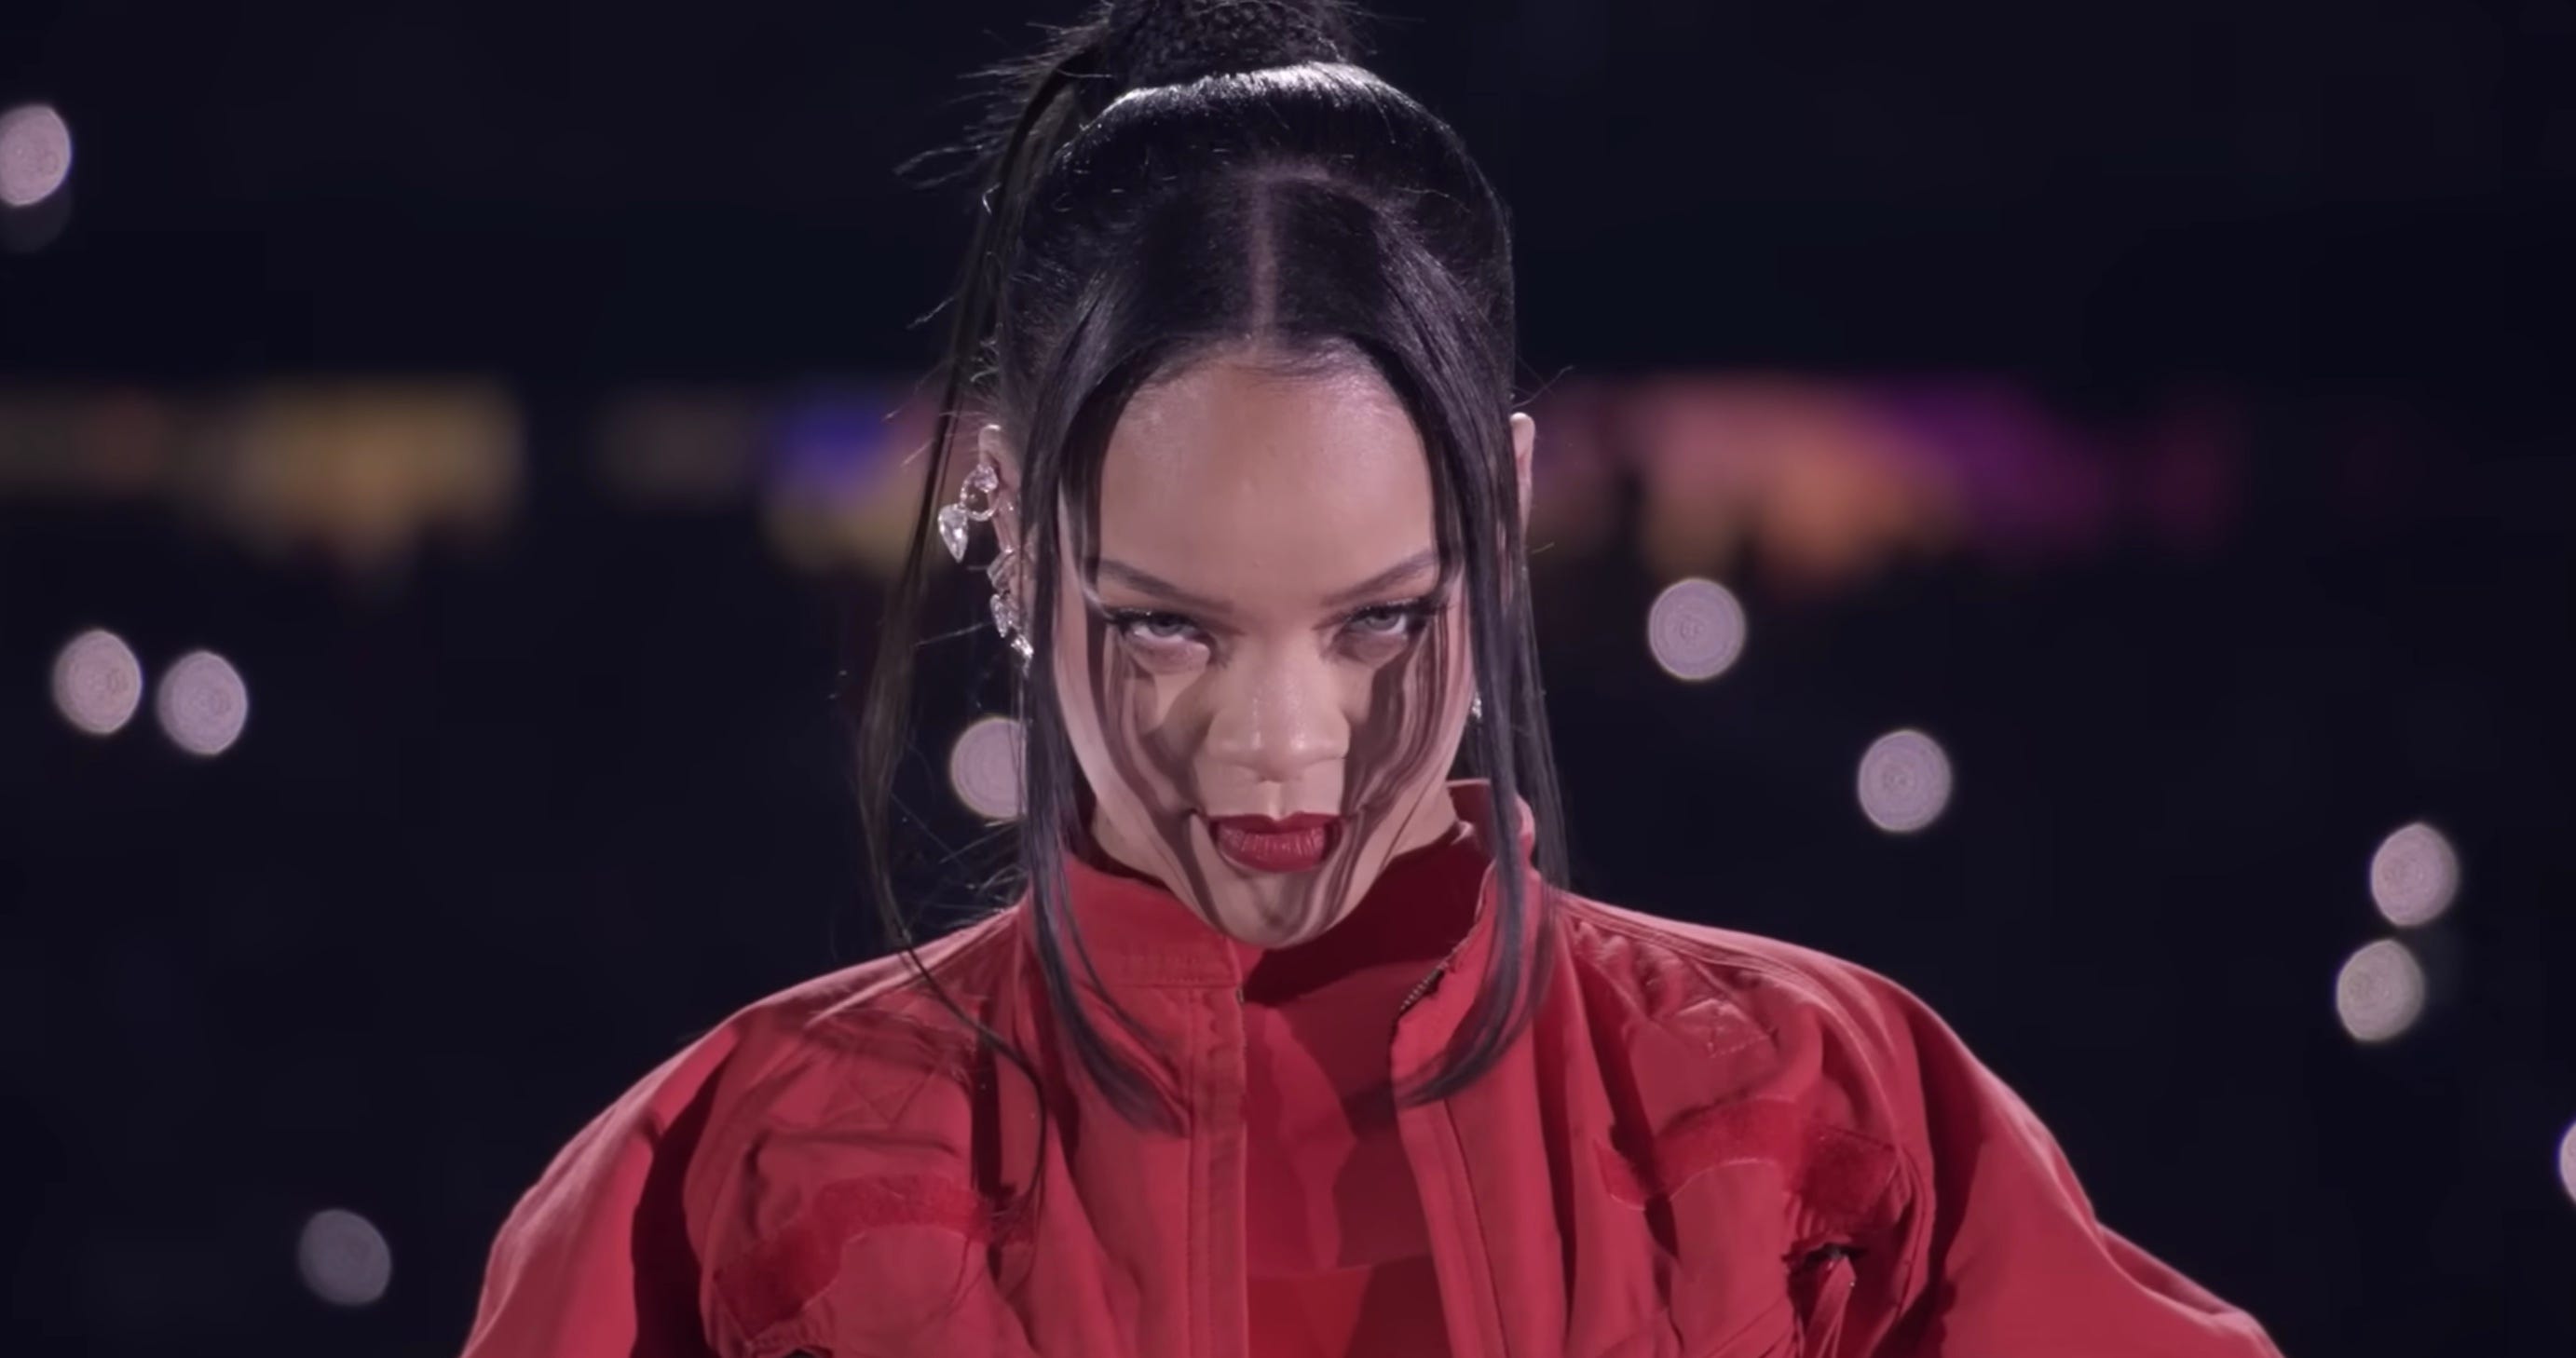 Why Fenty Beauty's Super Bowl Ad went viral